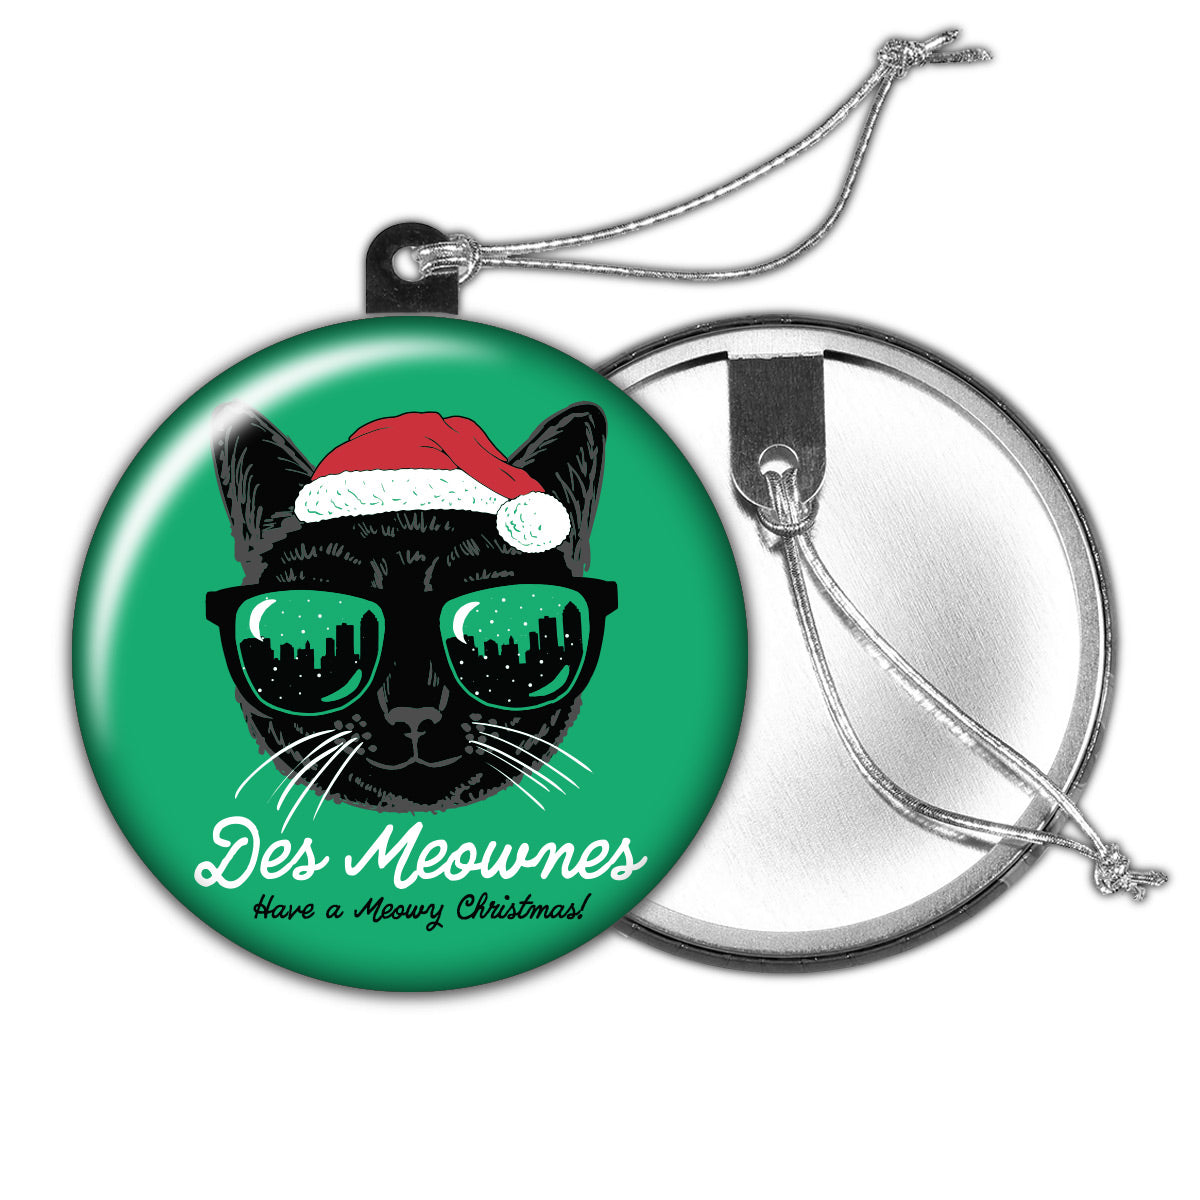 Des Meownes Meowy Christmas Holiday Ornament